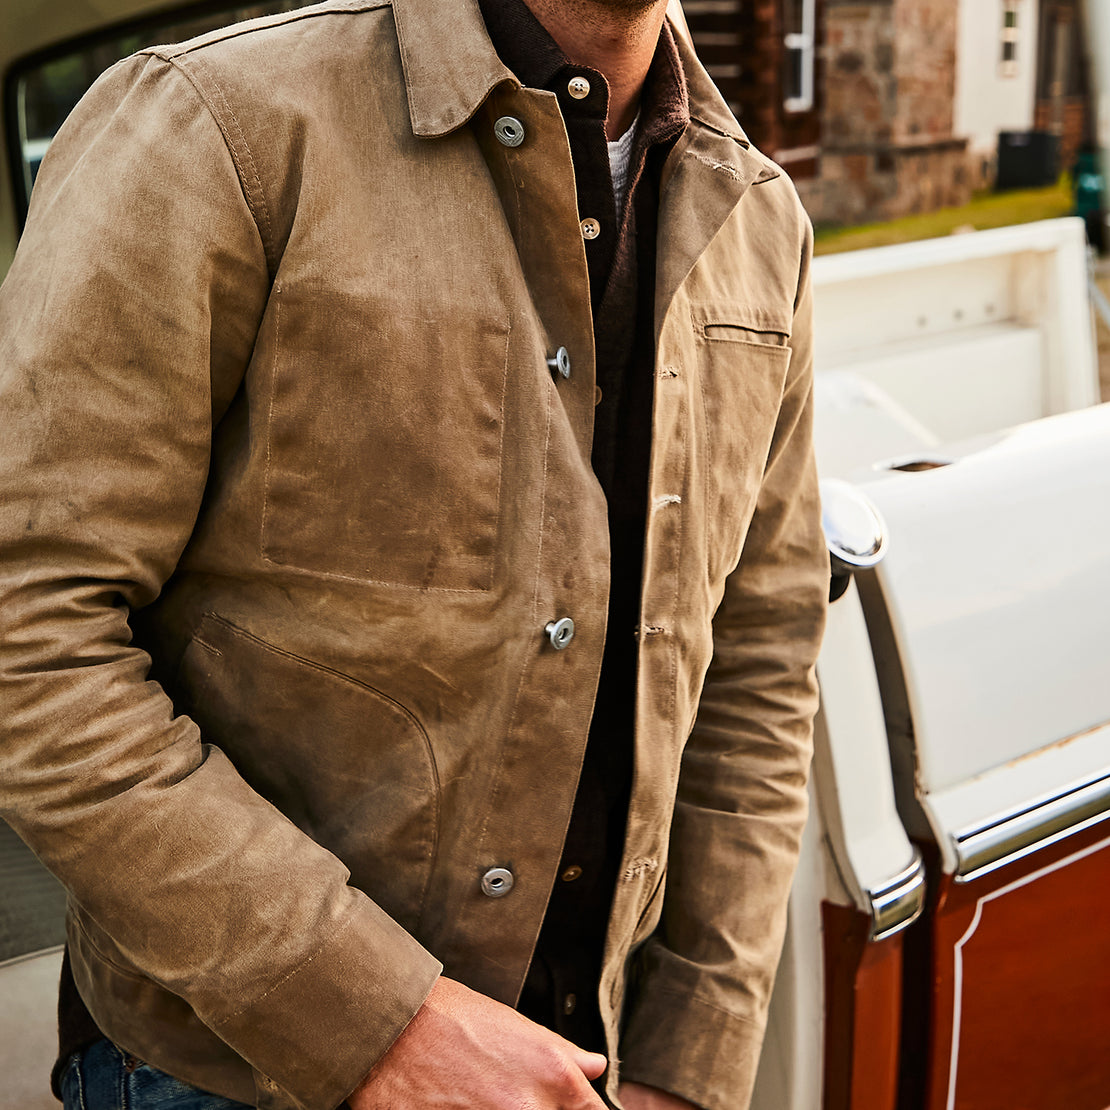 Supply Jacket - Waxed Tan Ridgeline - Rogue Territory - STAG Provisions - Outerwear - Coat / Jacket